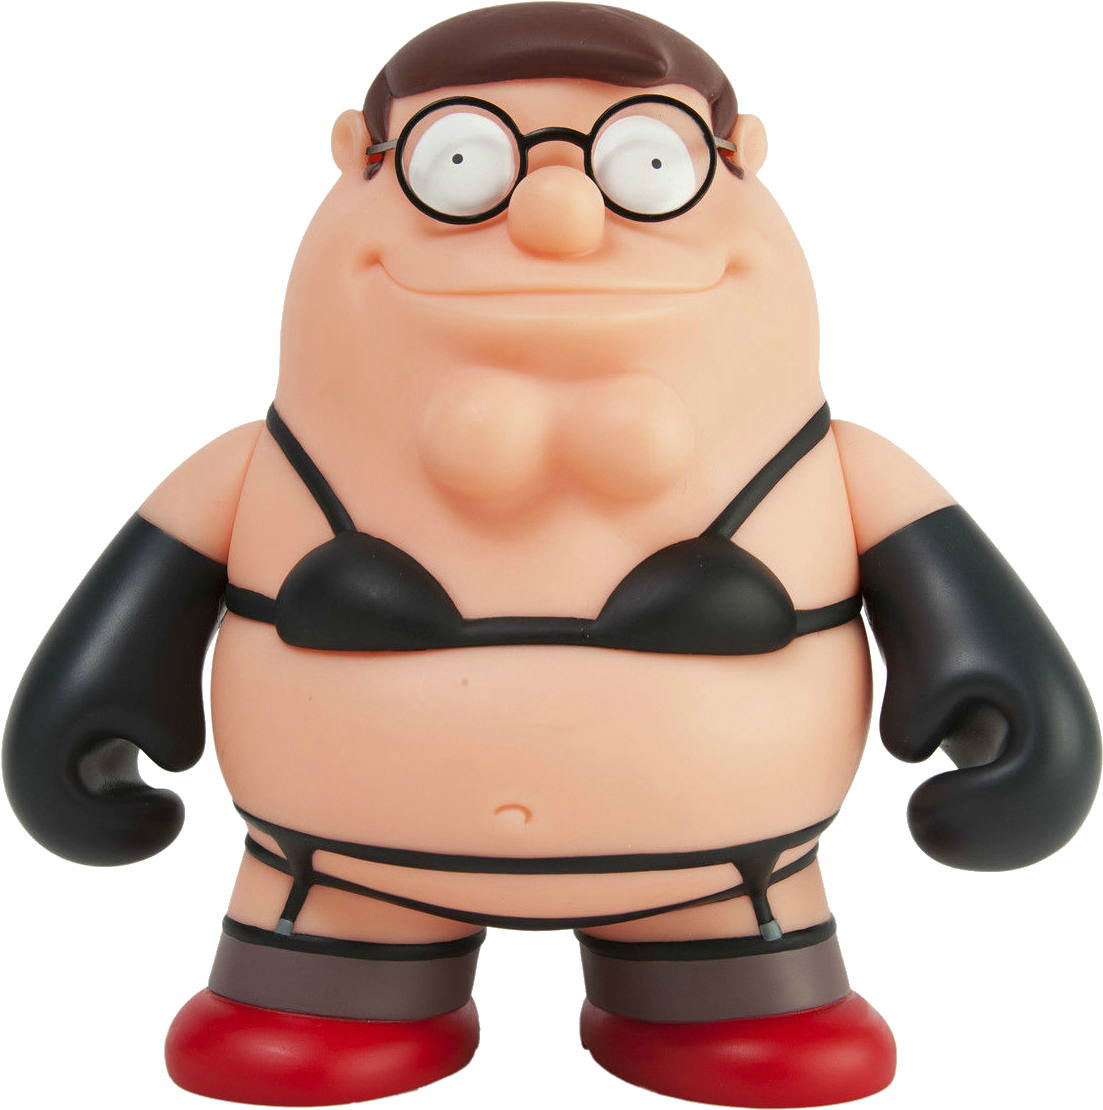 Family Guy Intimate Apparel Peter - Family Guy Intimate Apparel Peter 7-inch Vinyl Figure (1200x1200)